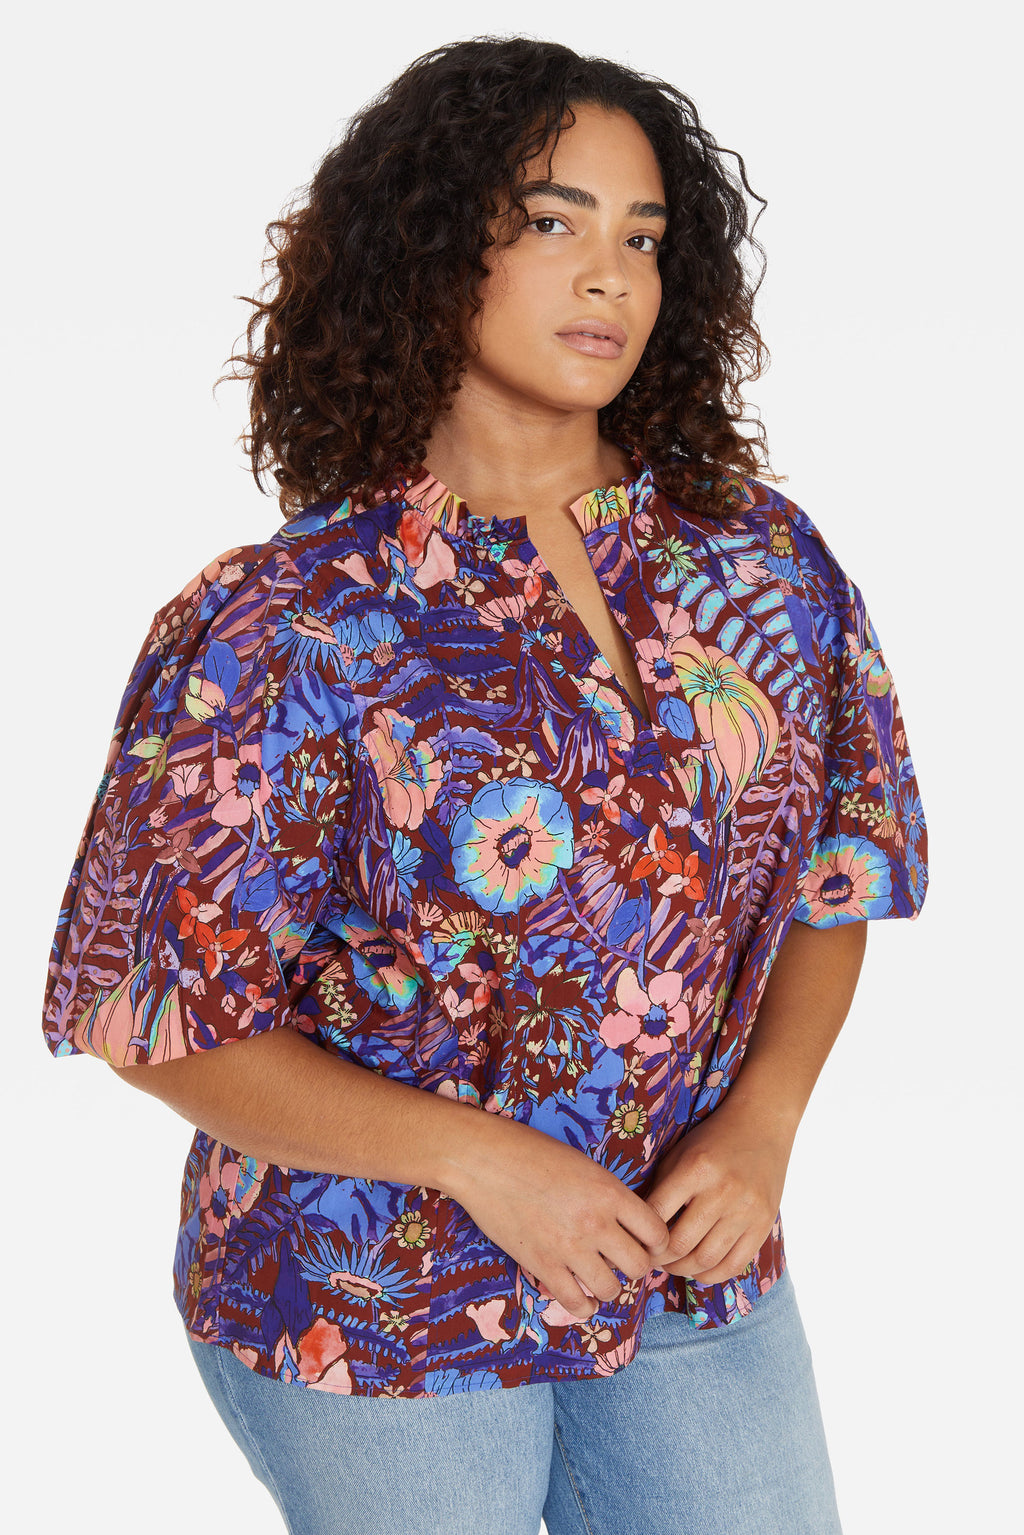 Puff sleeve v-neck top with ruffle details on the neckline in a bold floral print